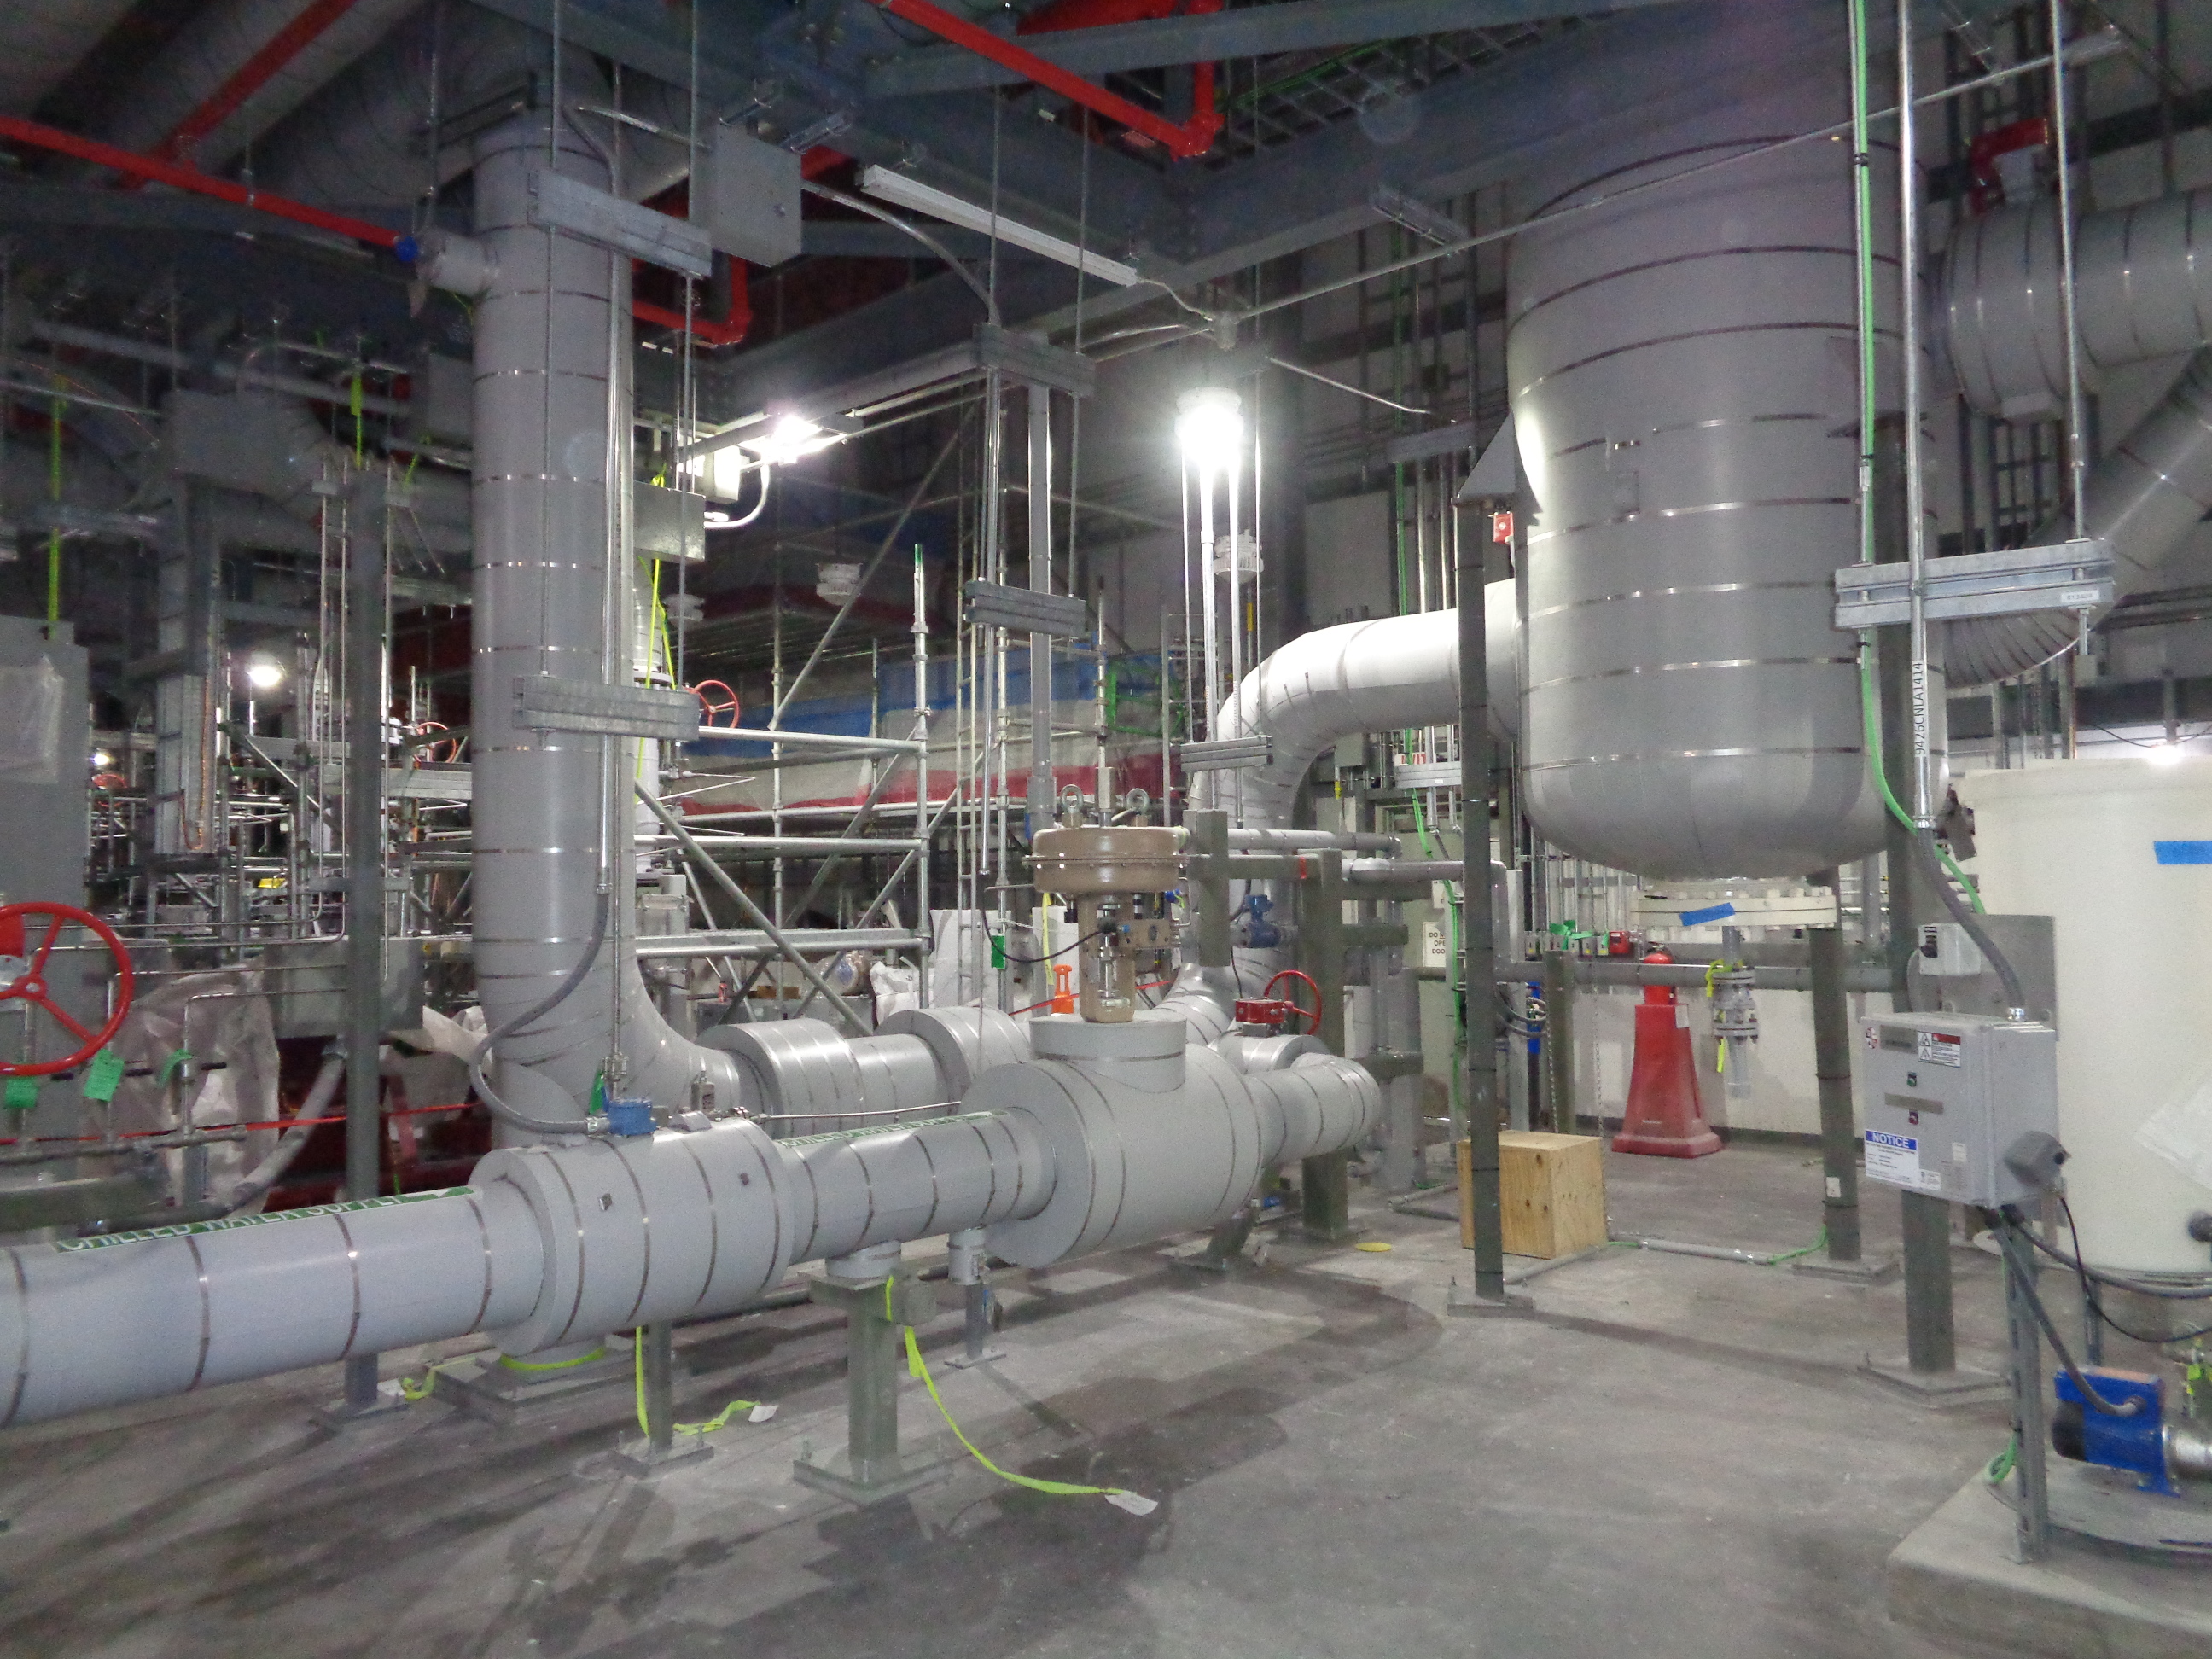 Mechanical Electrical Building chilled water system 